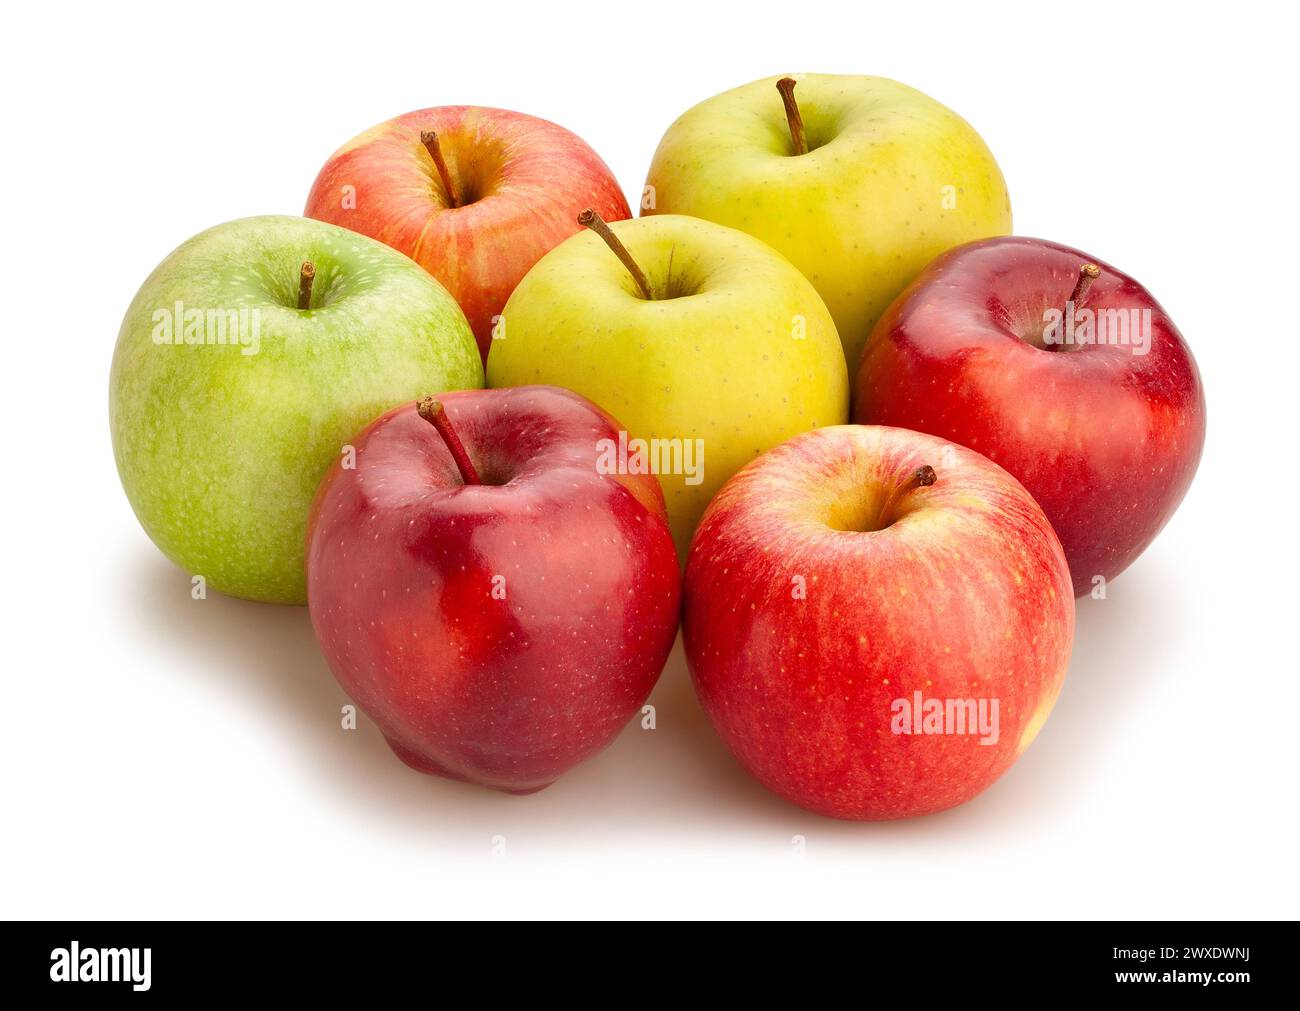 apples mix path isolated on white Stock Photo